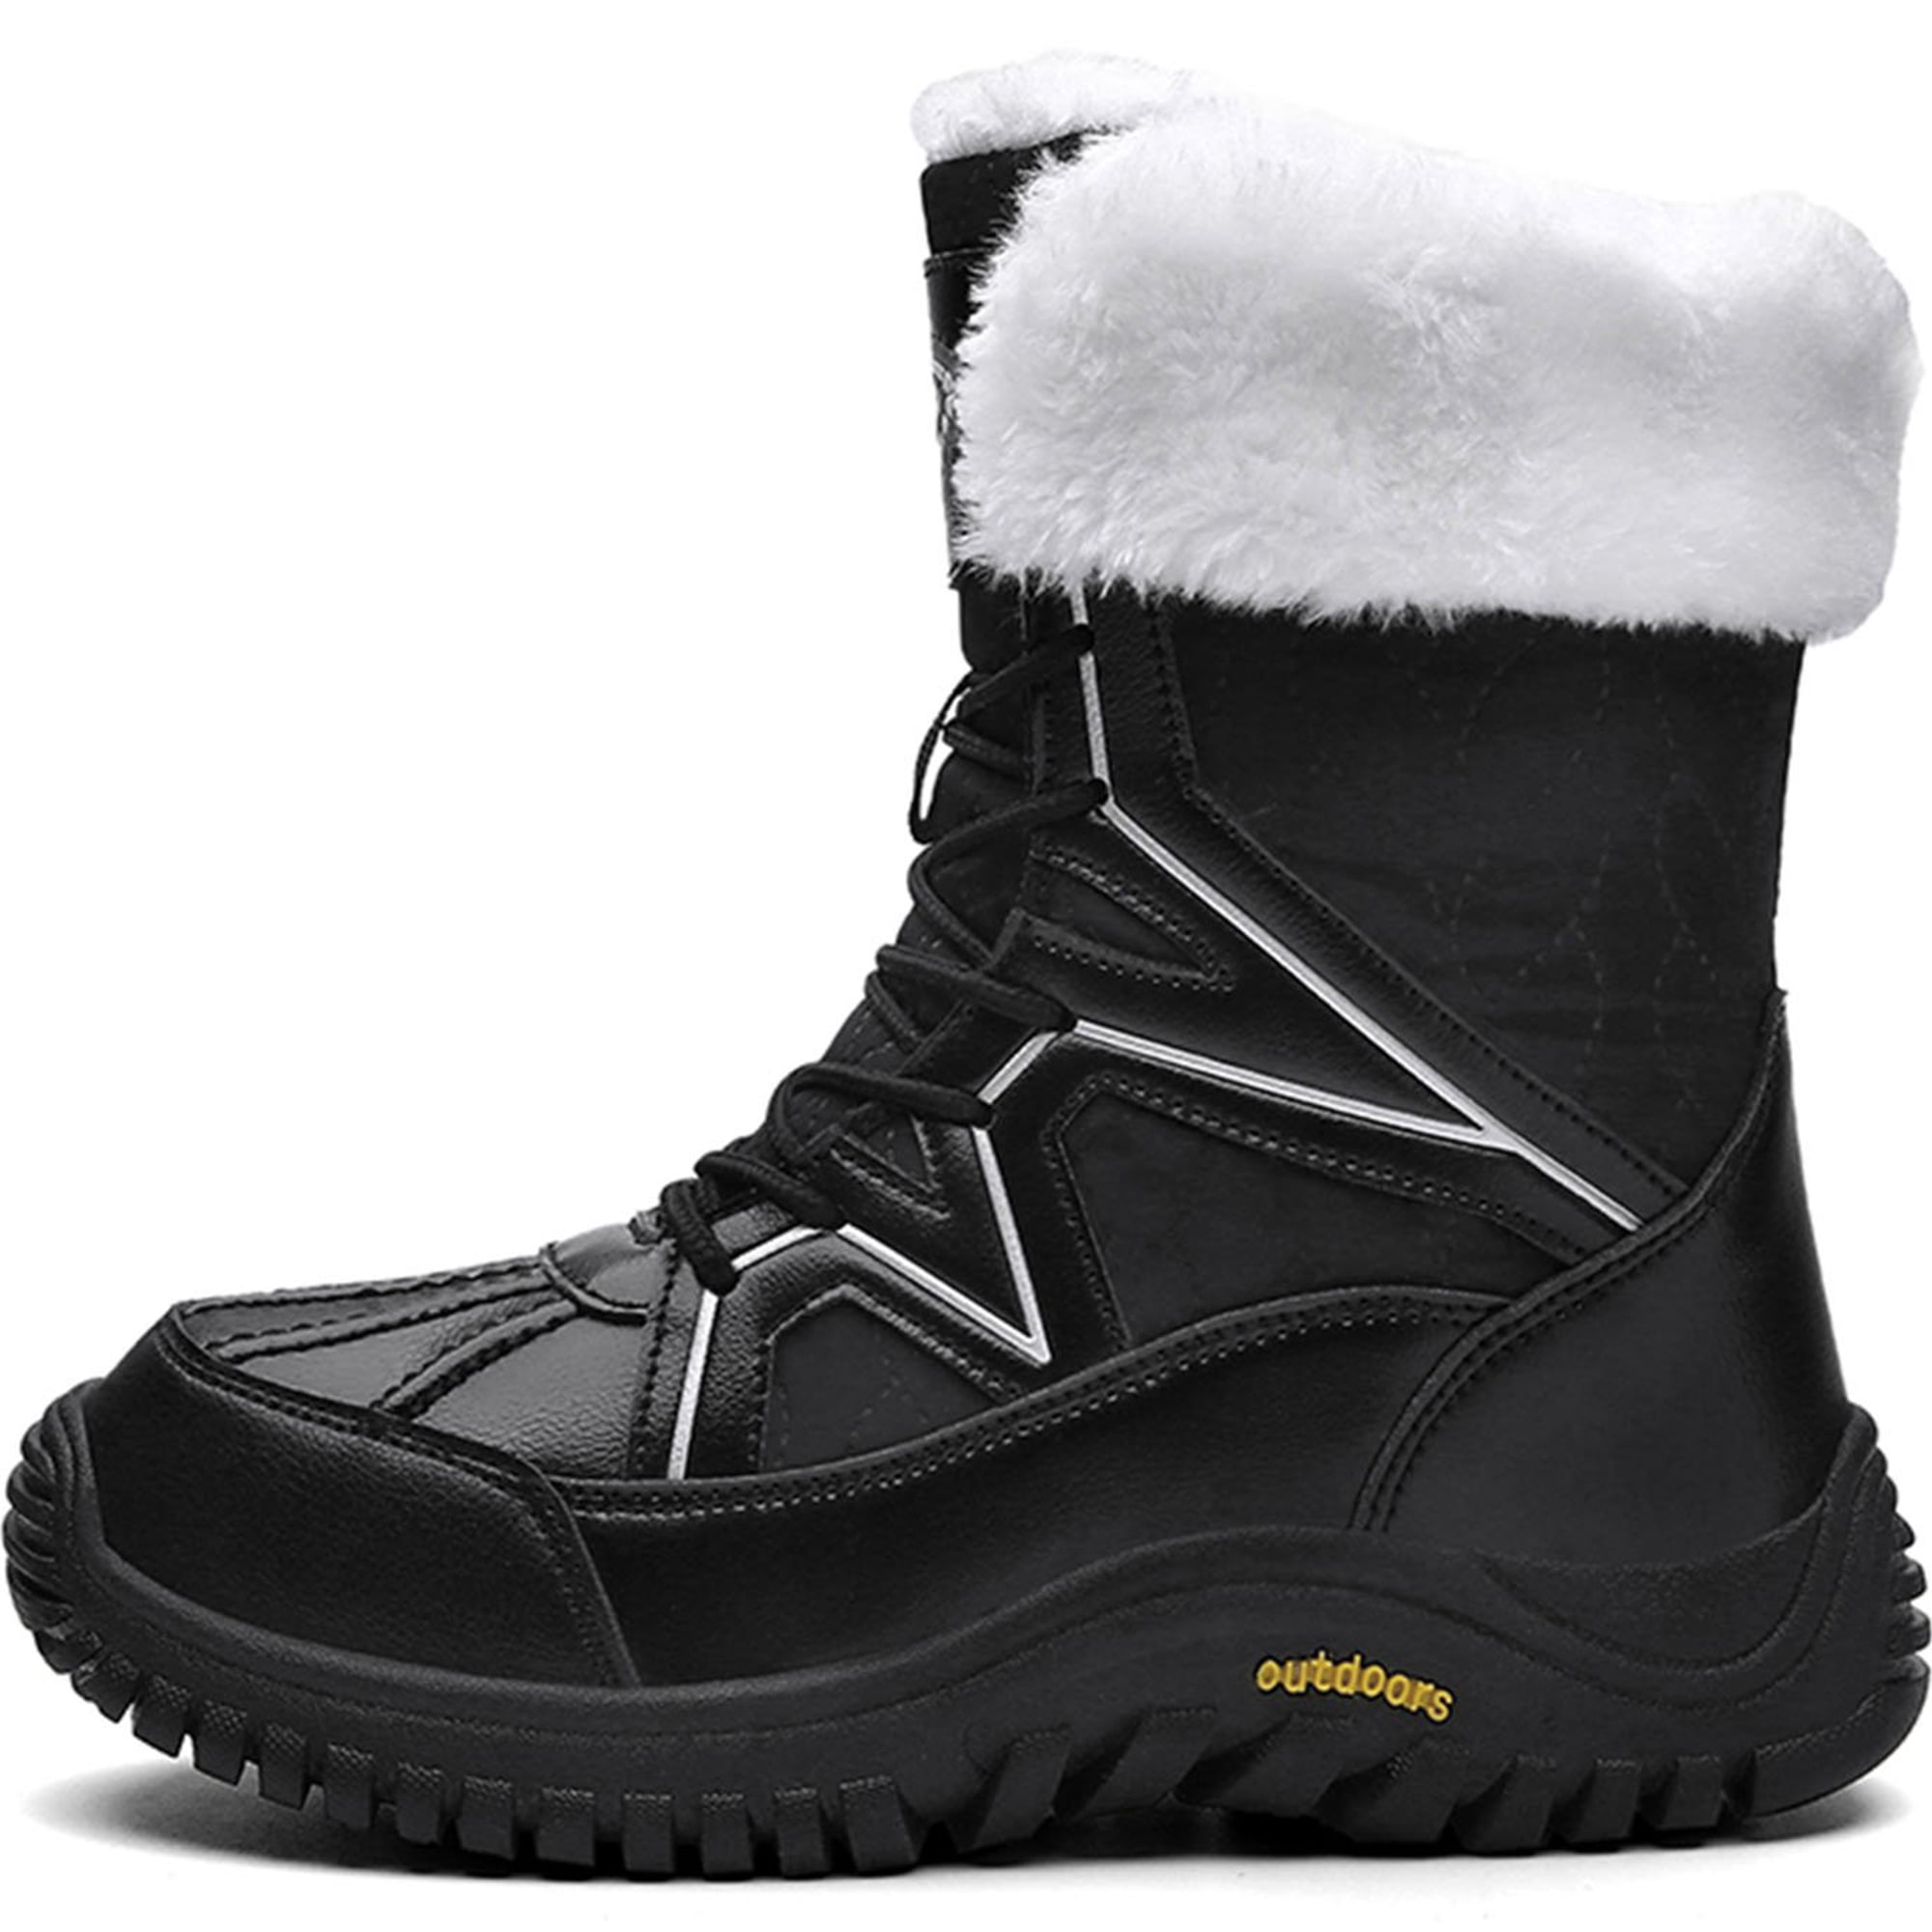 Tanleewa Fur Lining Mid-Calf Snow Boots for Women Shoe Size 11 Adult ...